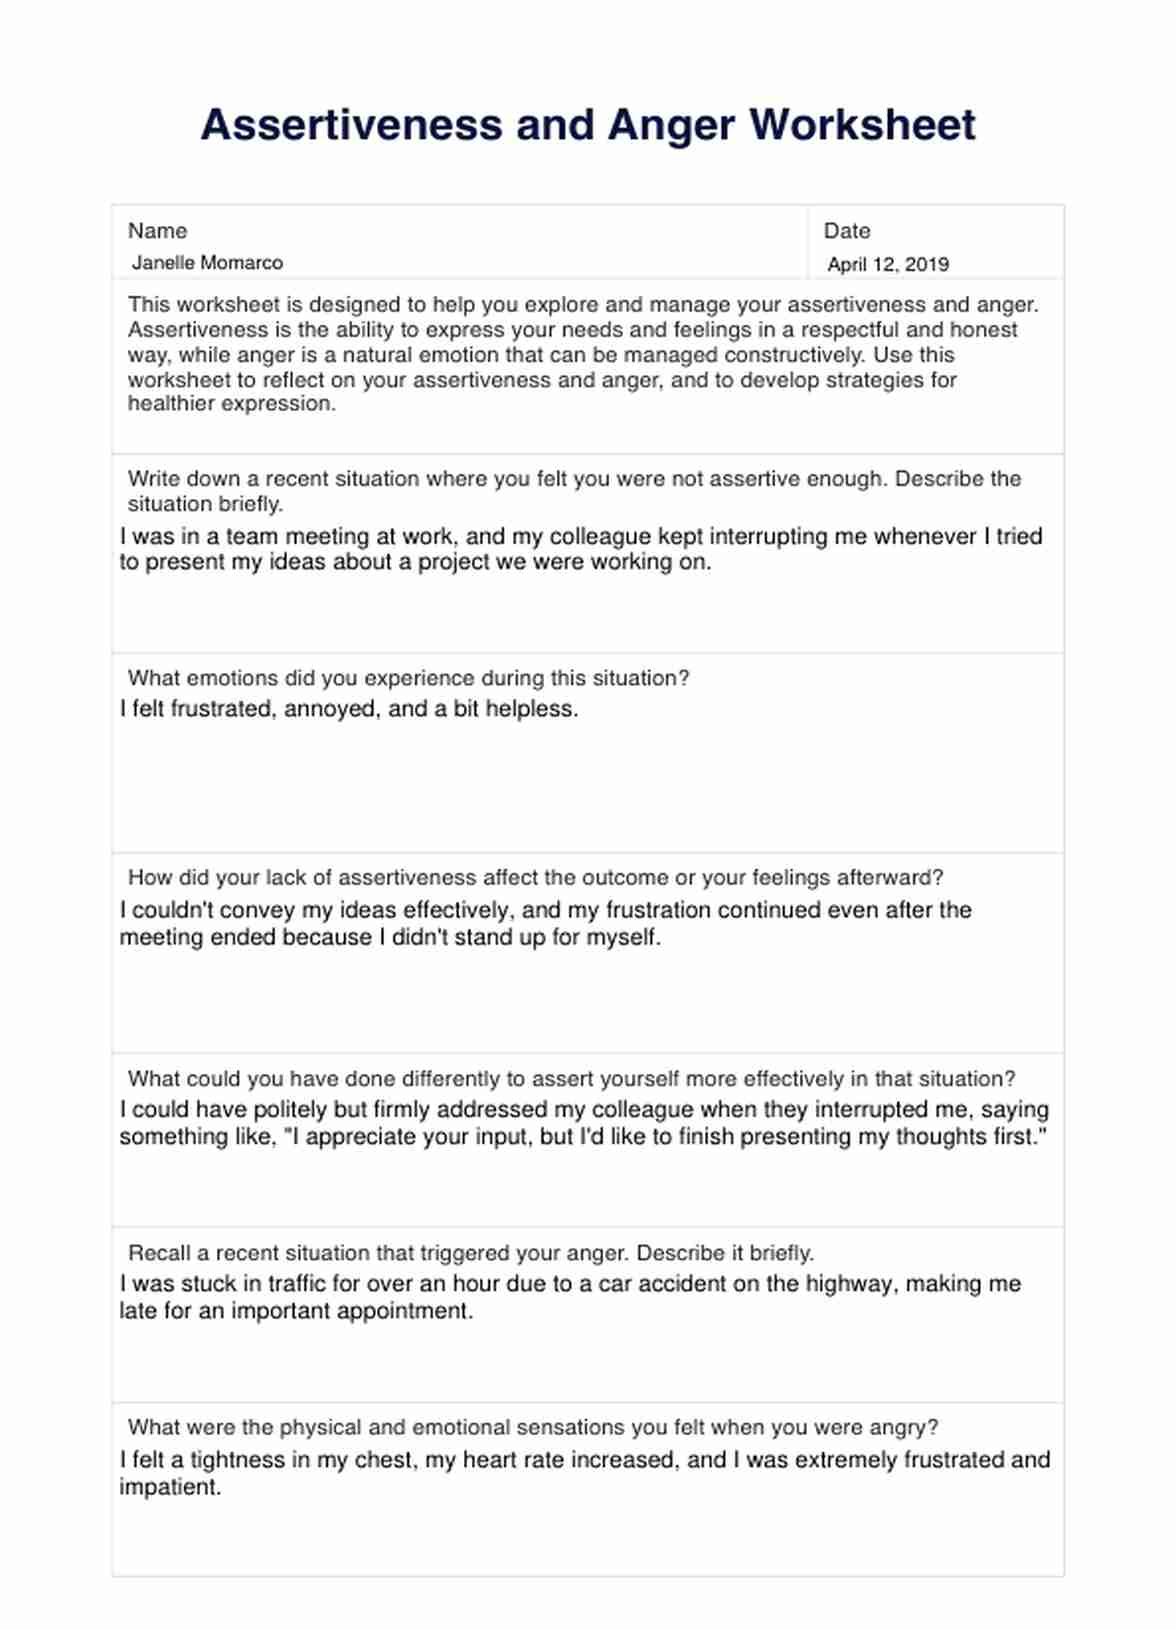 Assertiveness and Anger Worksheets PDF Example